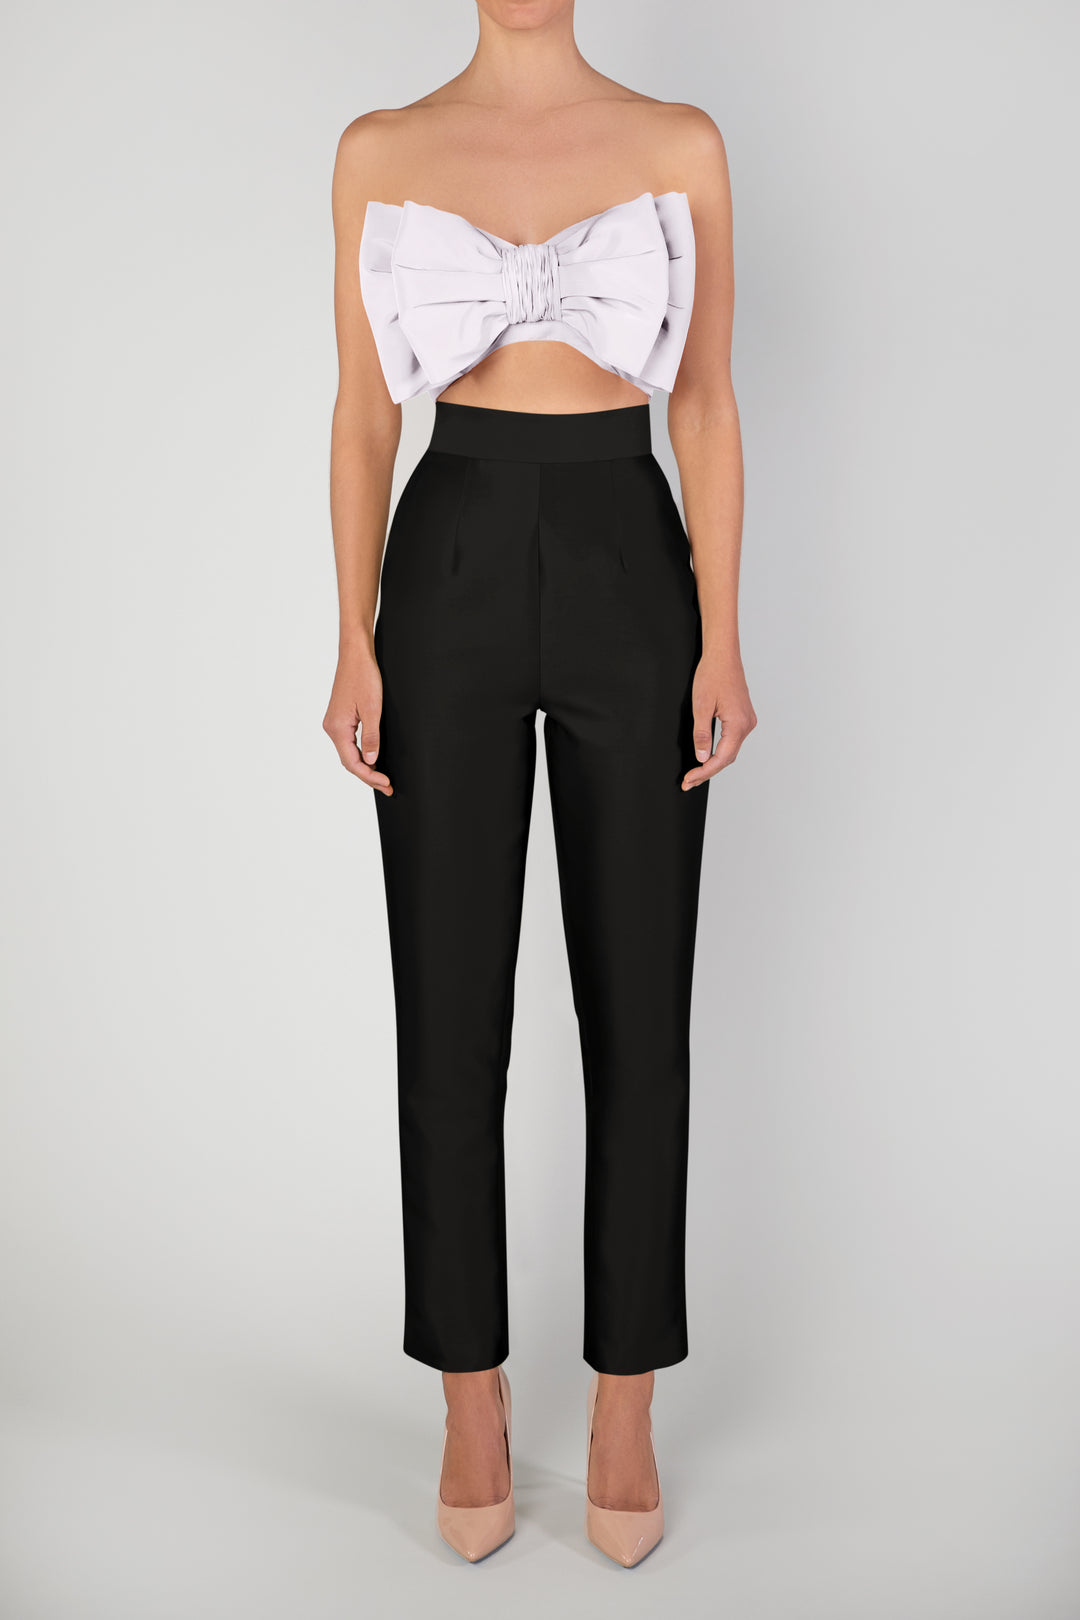 Black Wool Blend High Waisted Cigarette Trousers